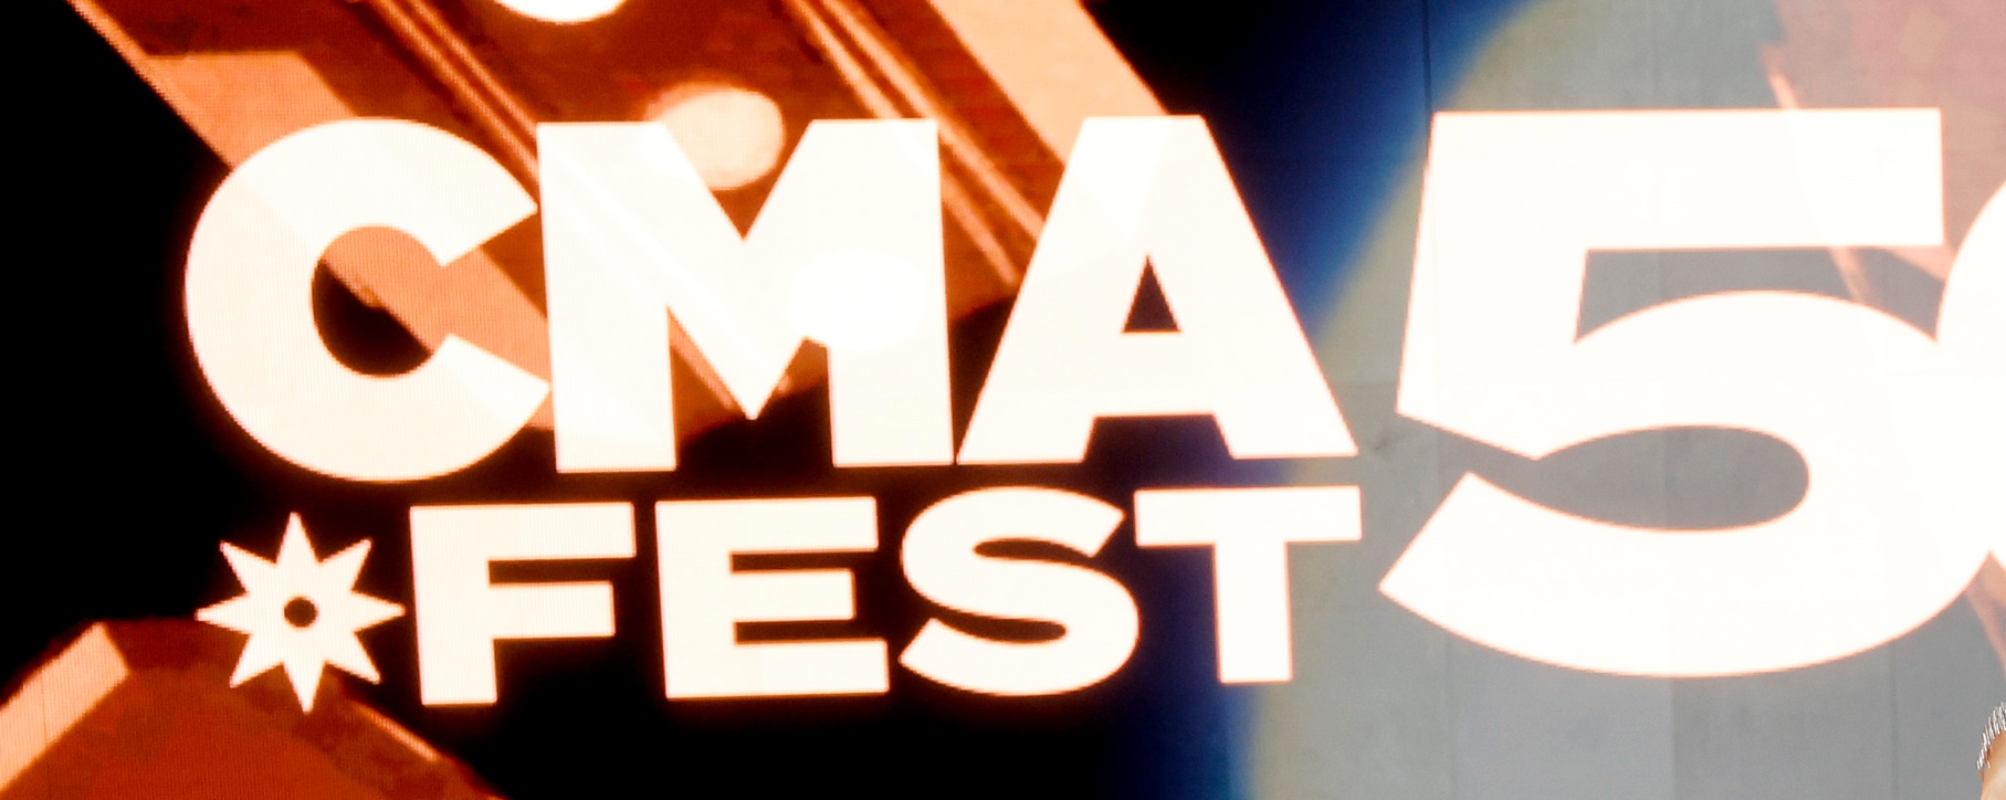 Check Out the CMA Fest Full Lineup, Stages, and Events Coming to Downtown Nashville June 6 to 9